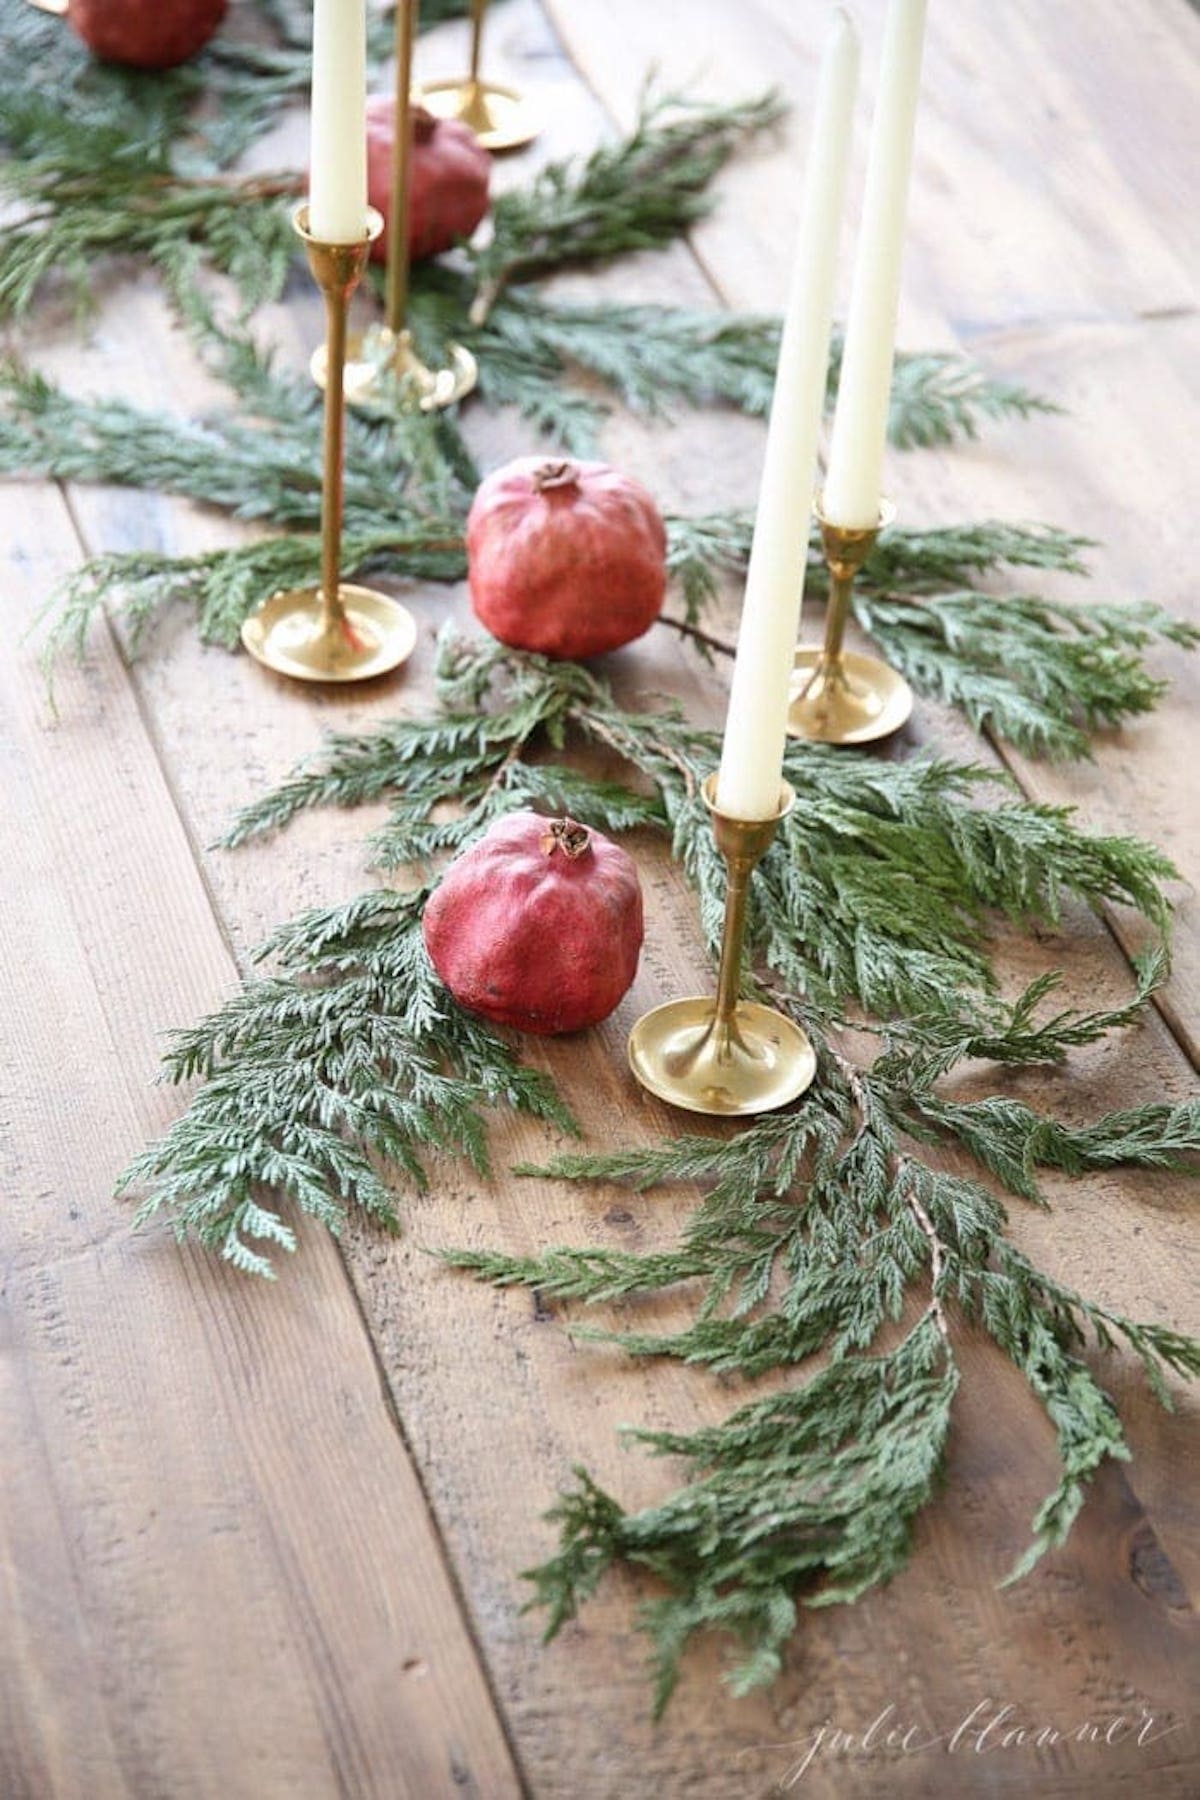 A festive Christmas centerpiece adorned with candles and pomegranates beautifully displayed on a rustic wooden table.